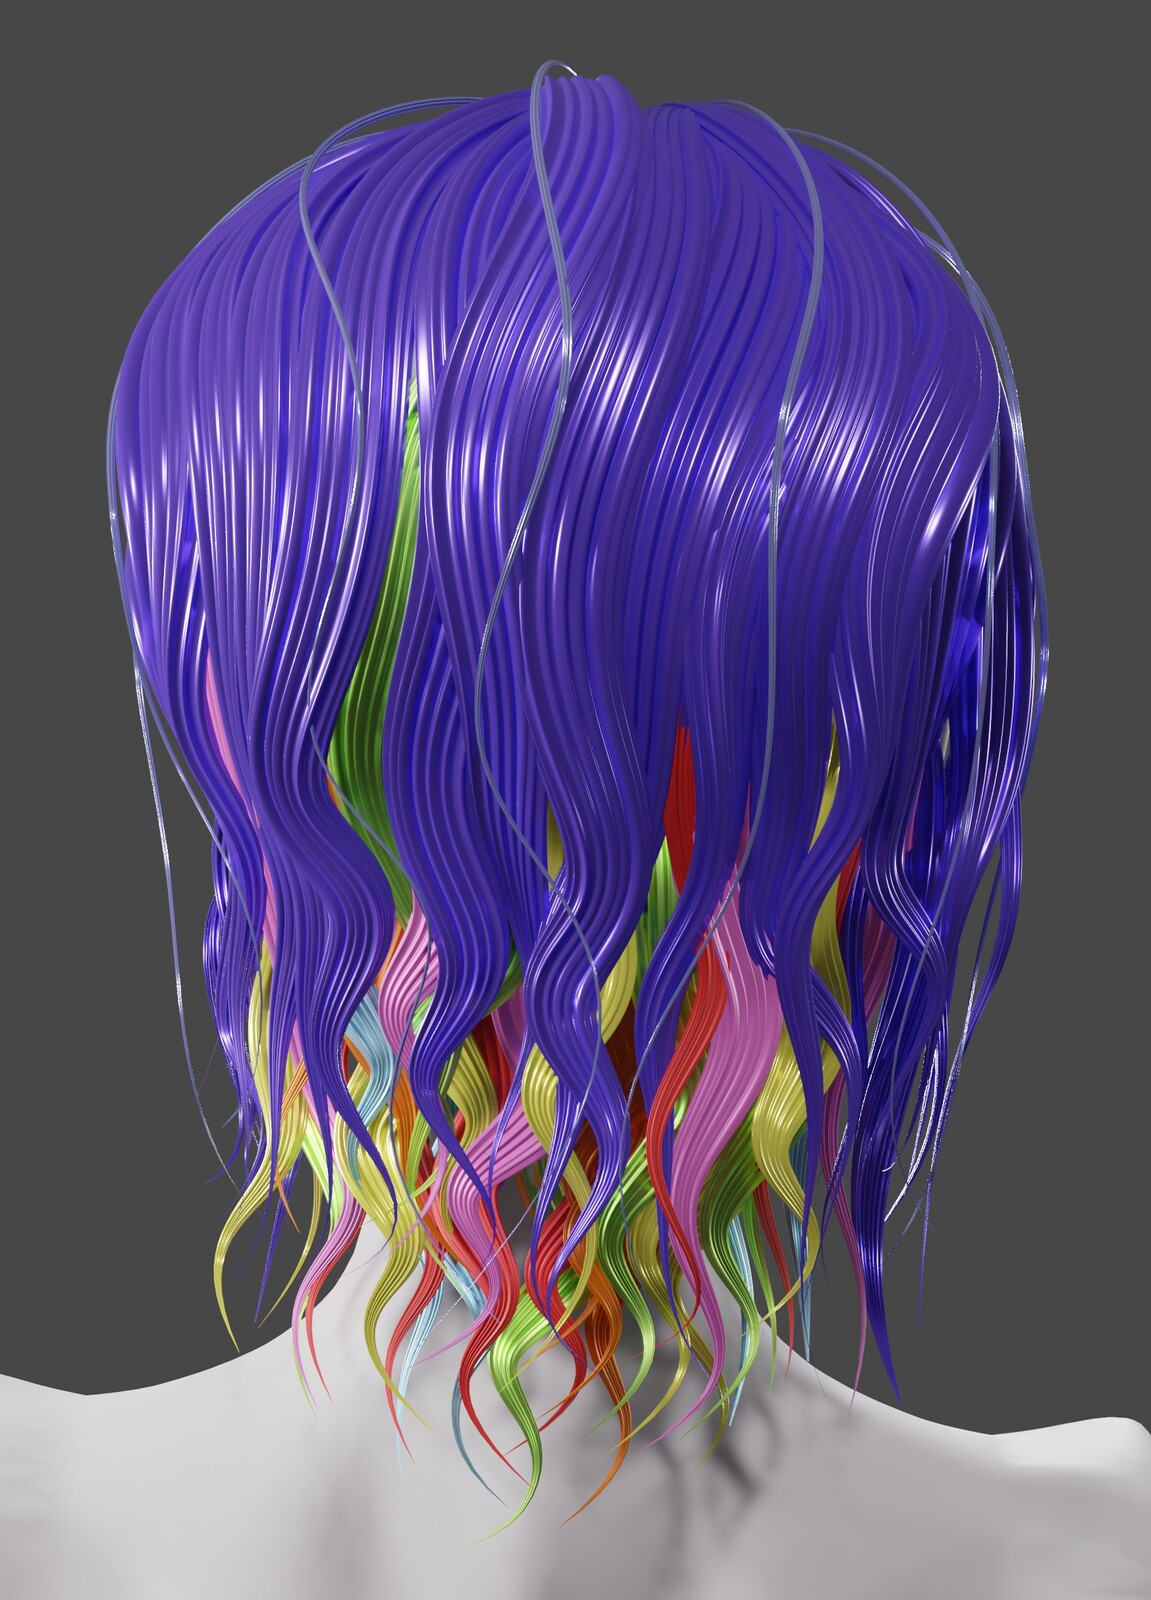 Colorful wavy hairstyle from the back